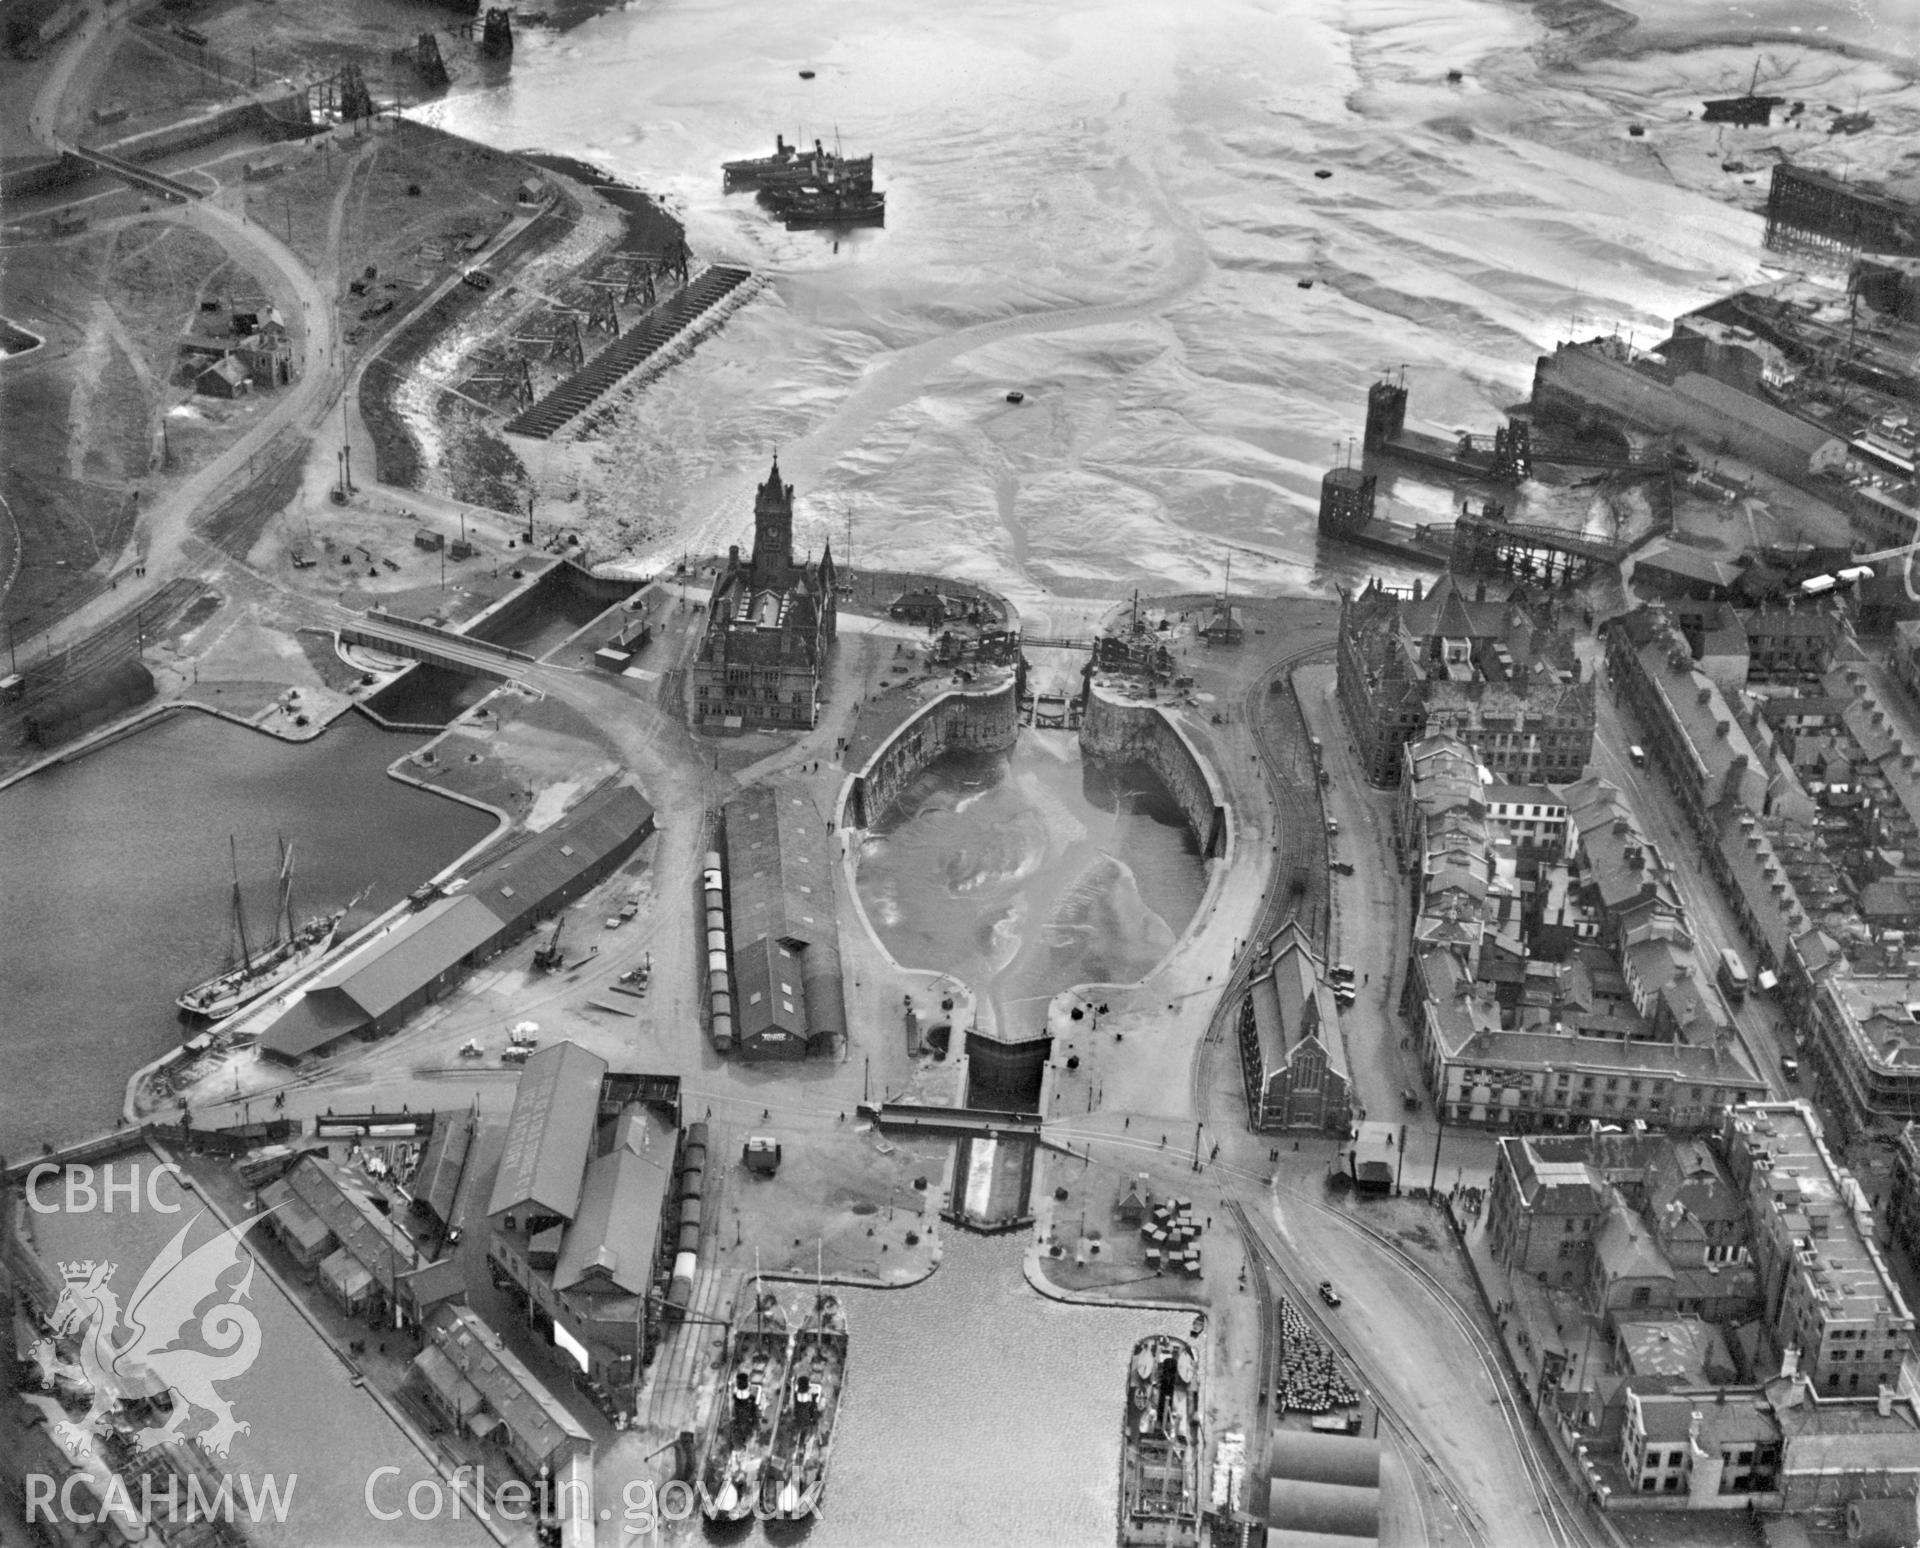 Black and white oblique aerial photograph showing Cardiff Docks from Aerofilms album no W22, taken by Aerofilms Ltd and dated 1929.